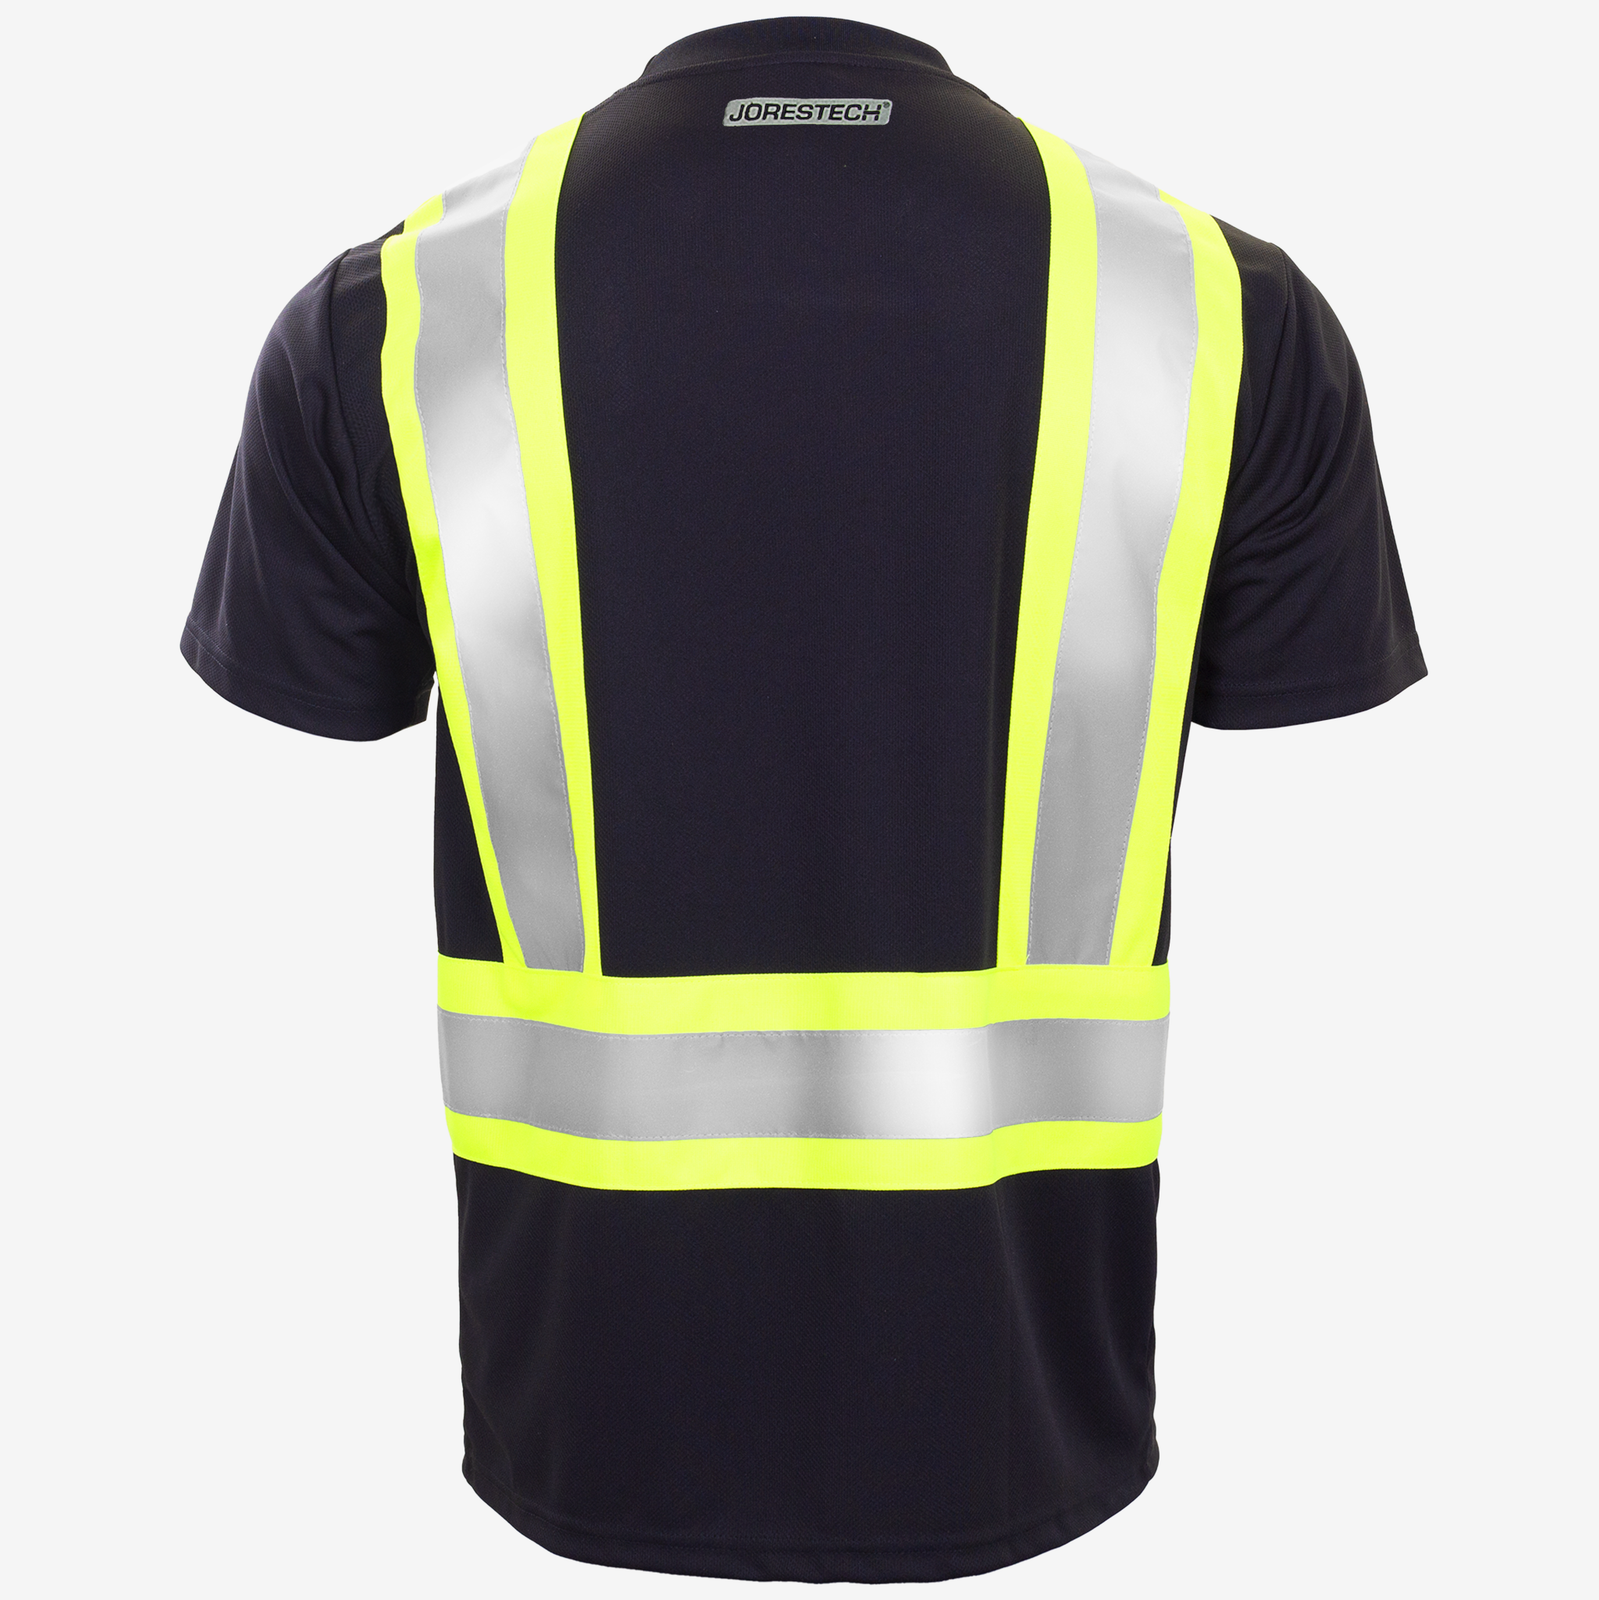 Back view of the JORESTECH short sleeve Hi-vis reflective two tone safety black and yellow shirt